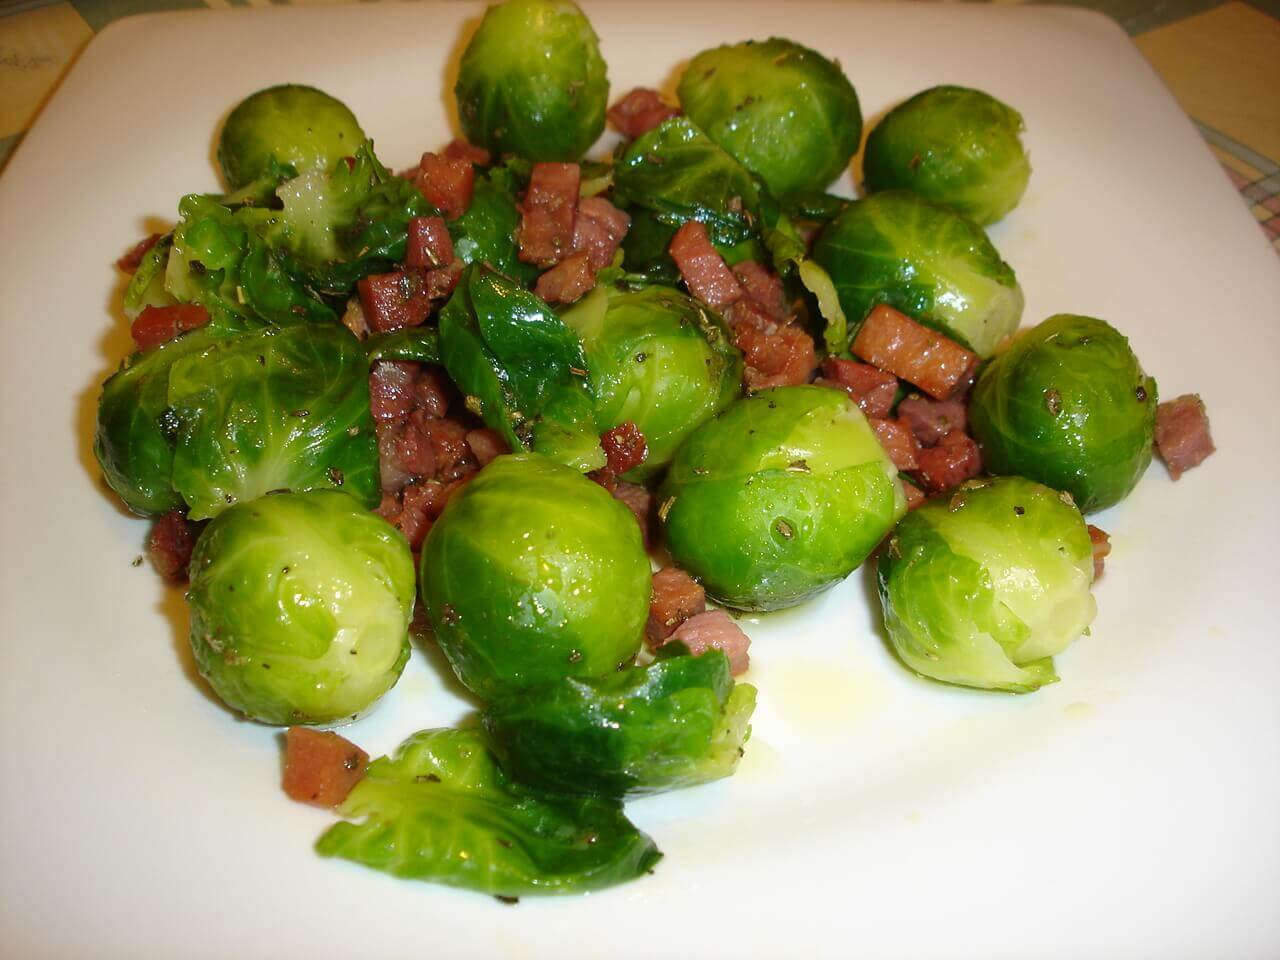 A dish with brussels sprouts.